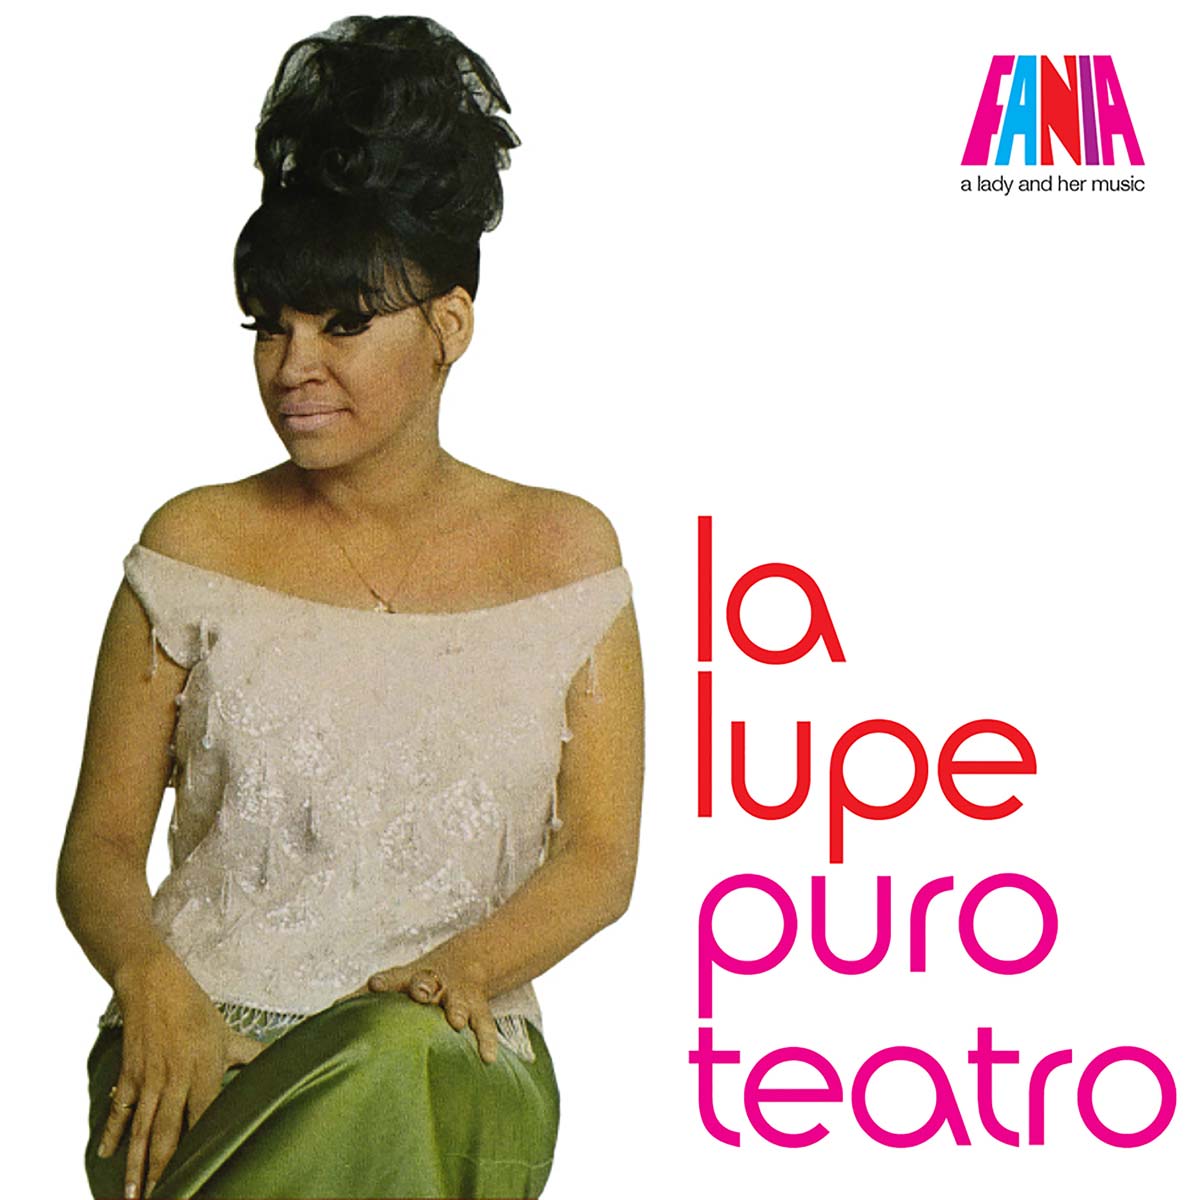 Featured Image for “A LADY AND HER MUSIC PURO TEATRO”